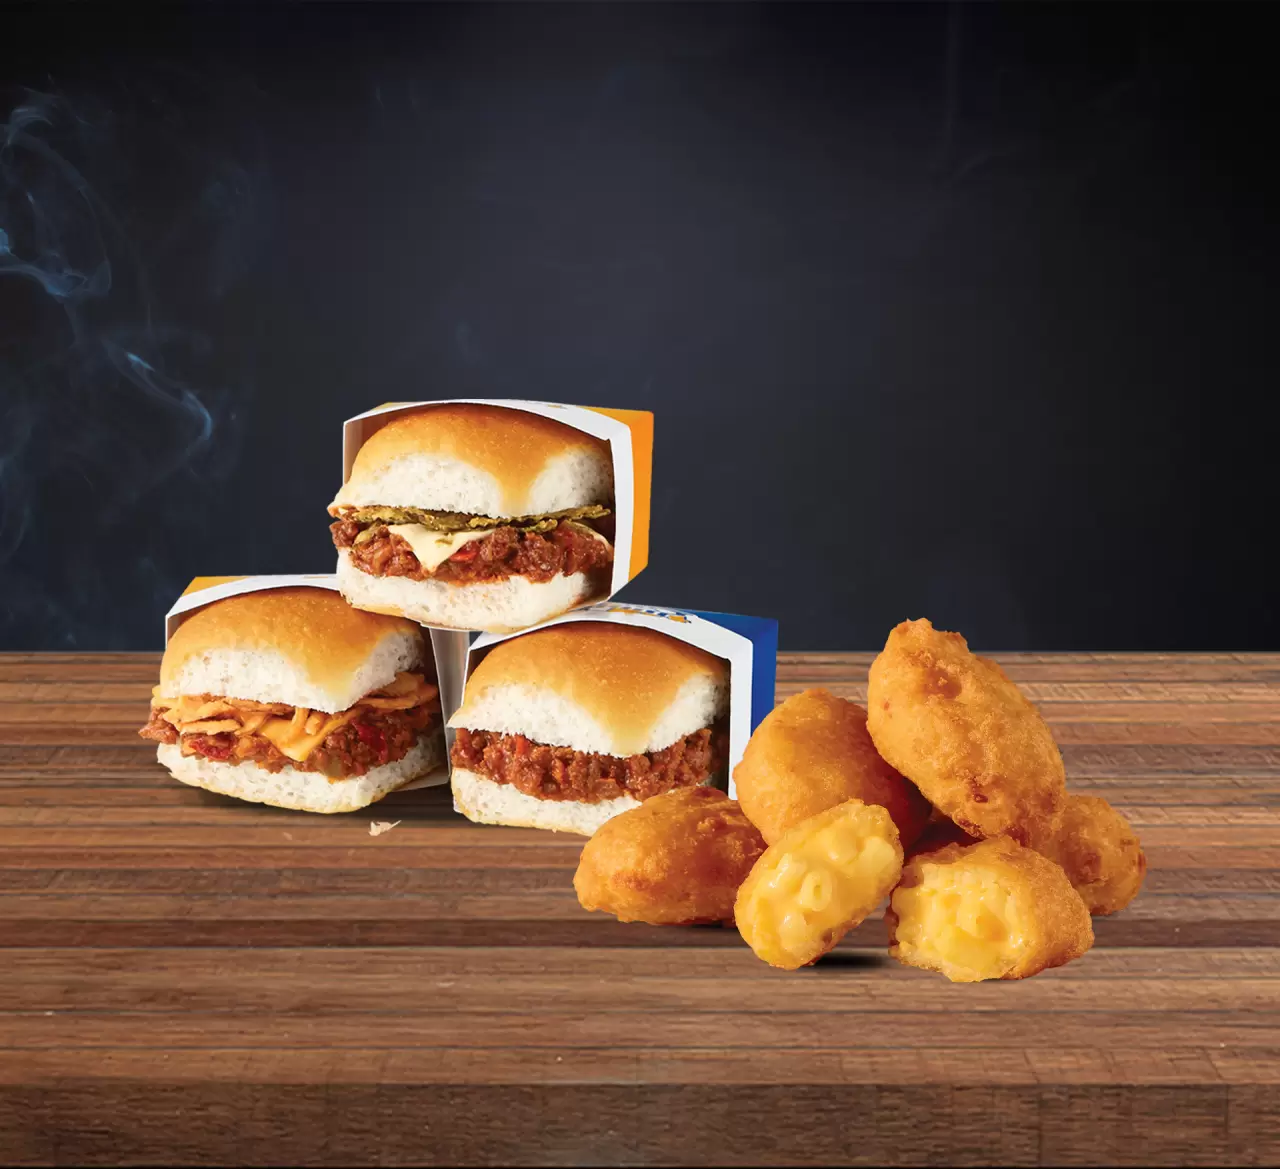 Sloppy Joe Sliders and Mac and Cheese Nibblers bring warm comfort as cooler temps settle in. img#1